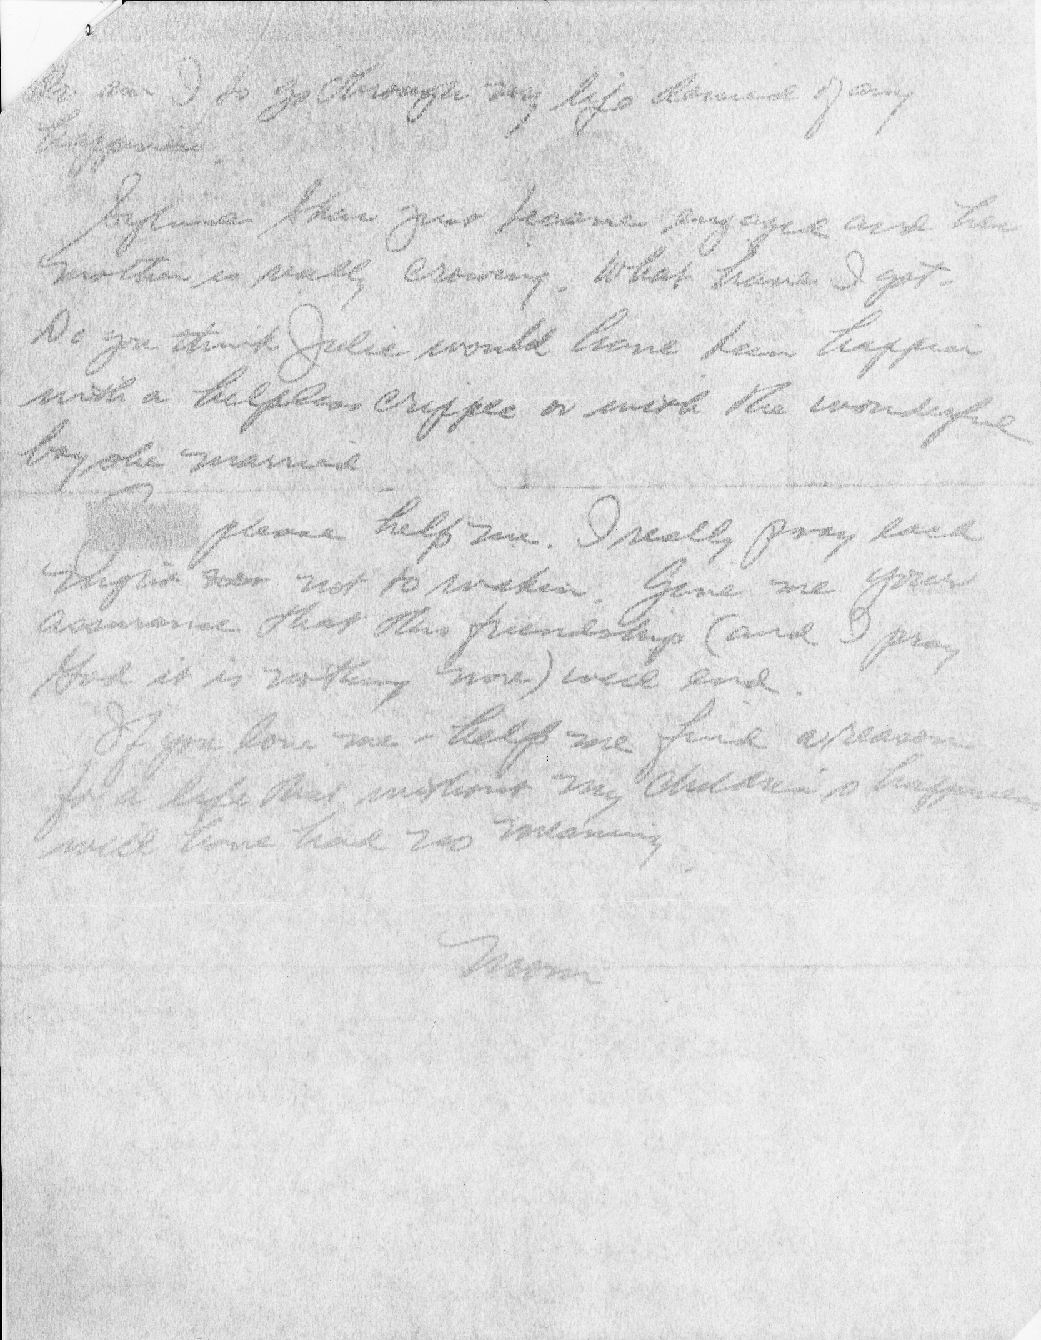 A mother writing to her daughter, page 2